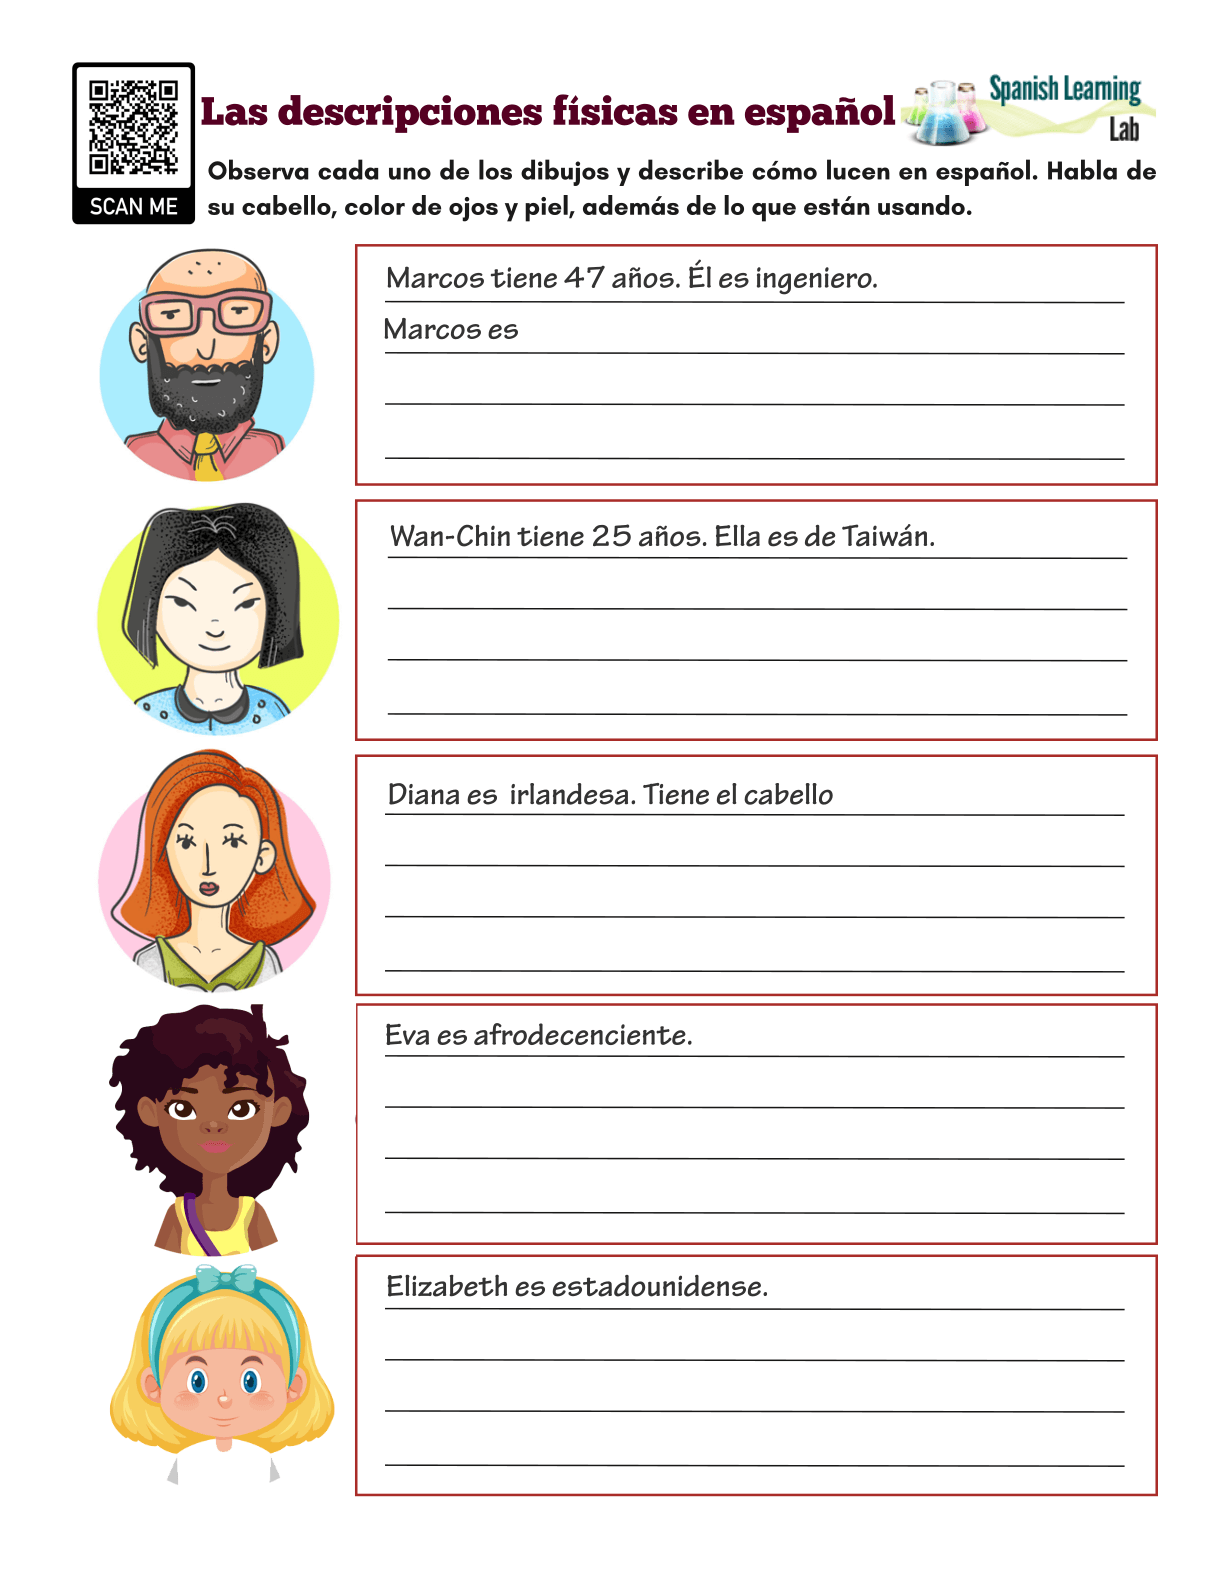 writing-physical-descriptions-in-spanish-pdf-worksheet-spanish-learning-lab